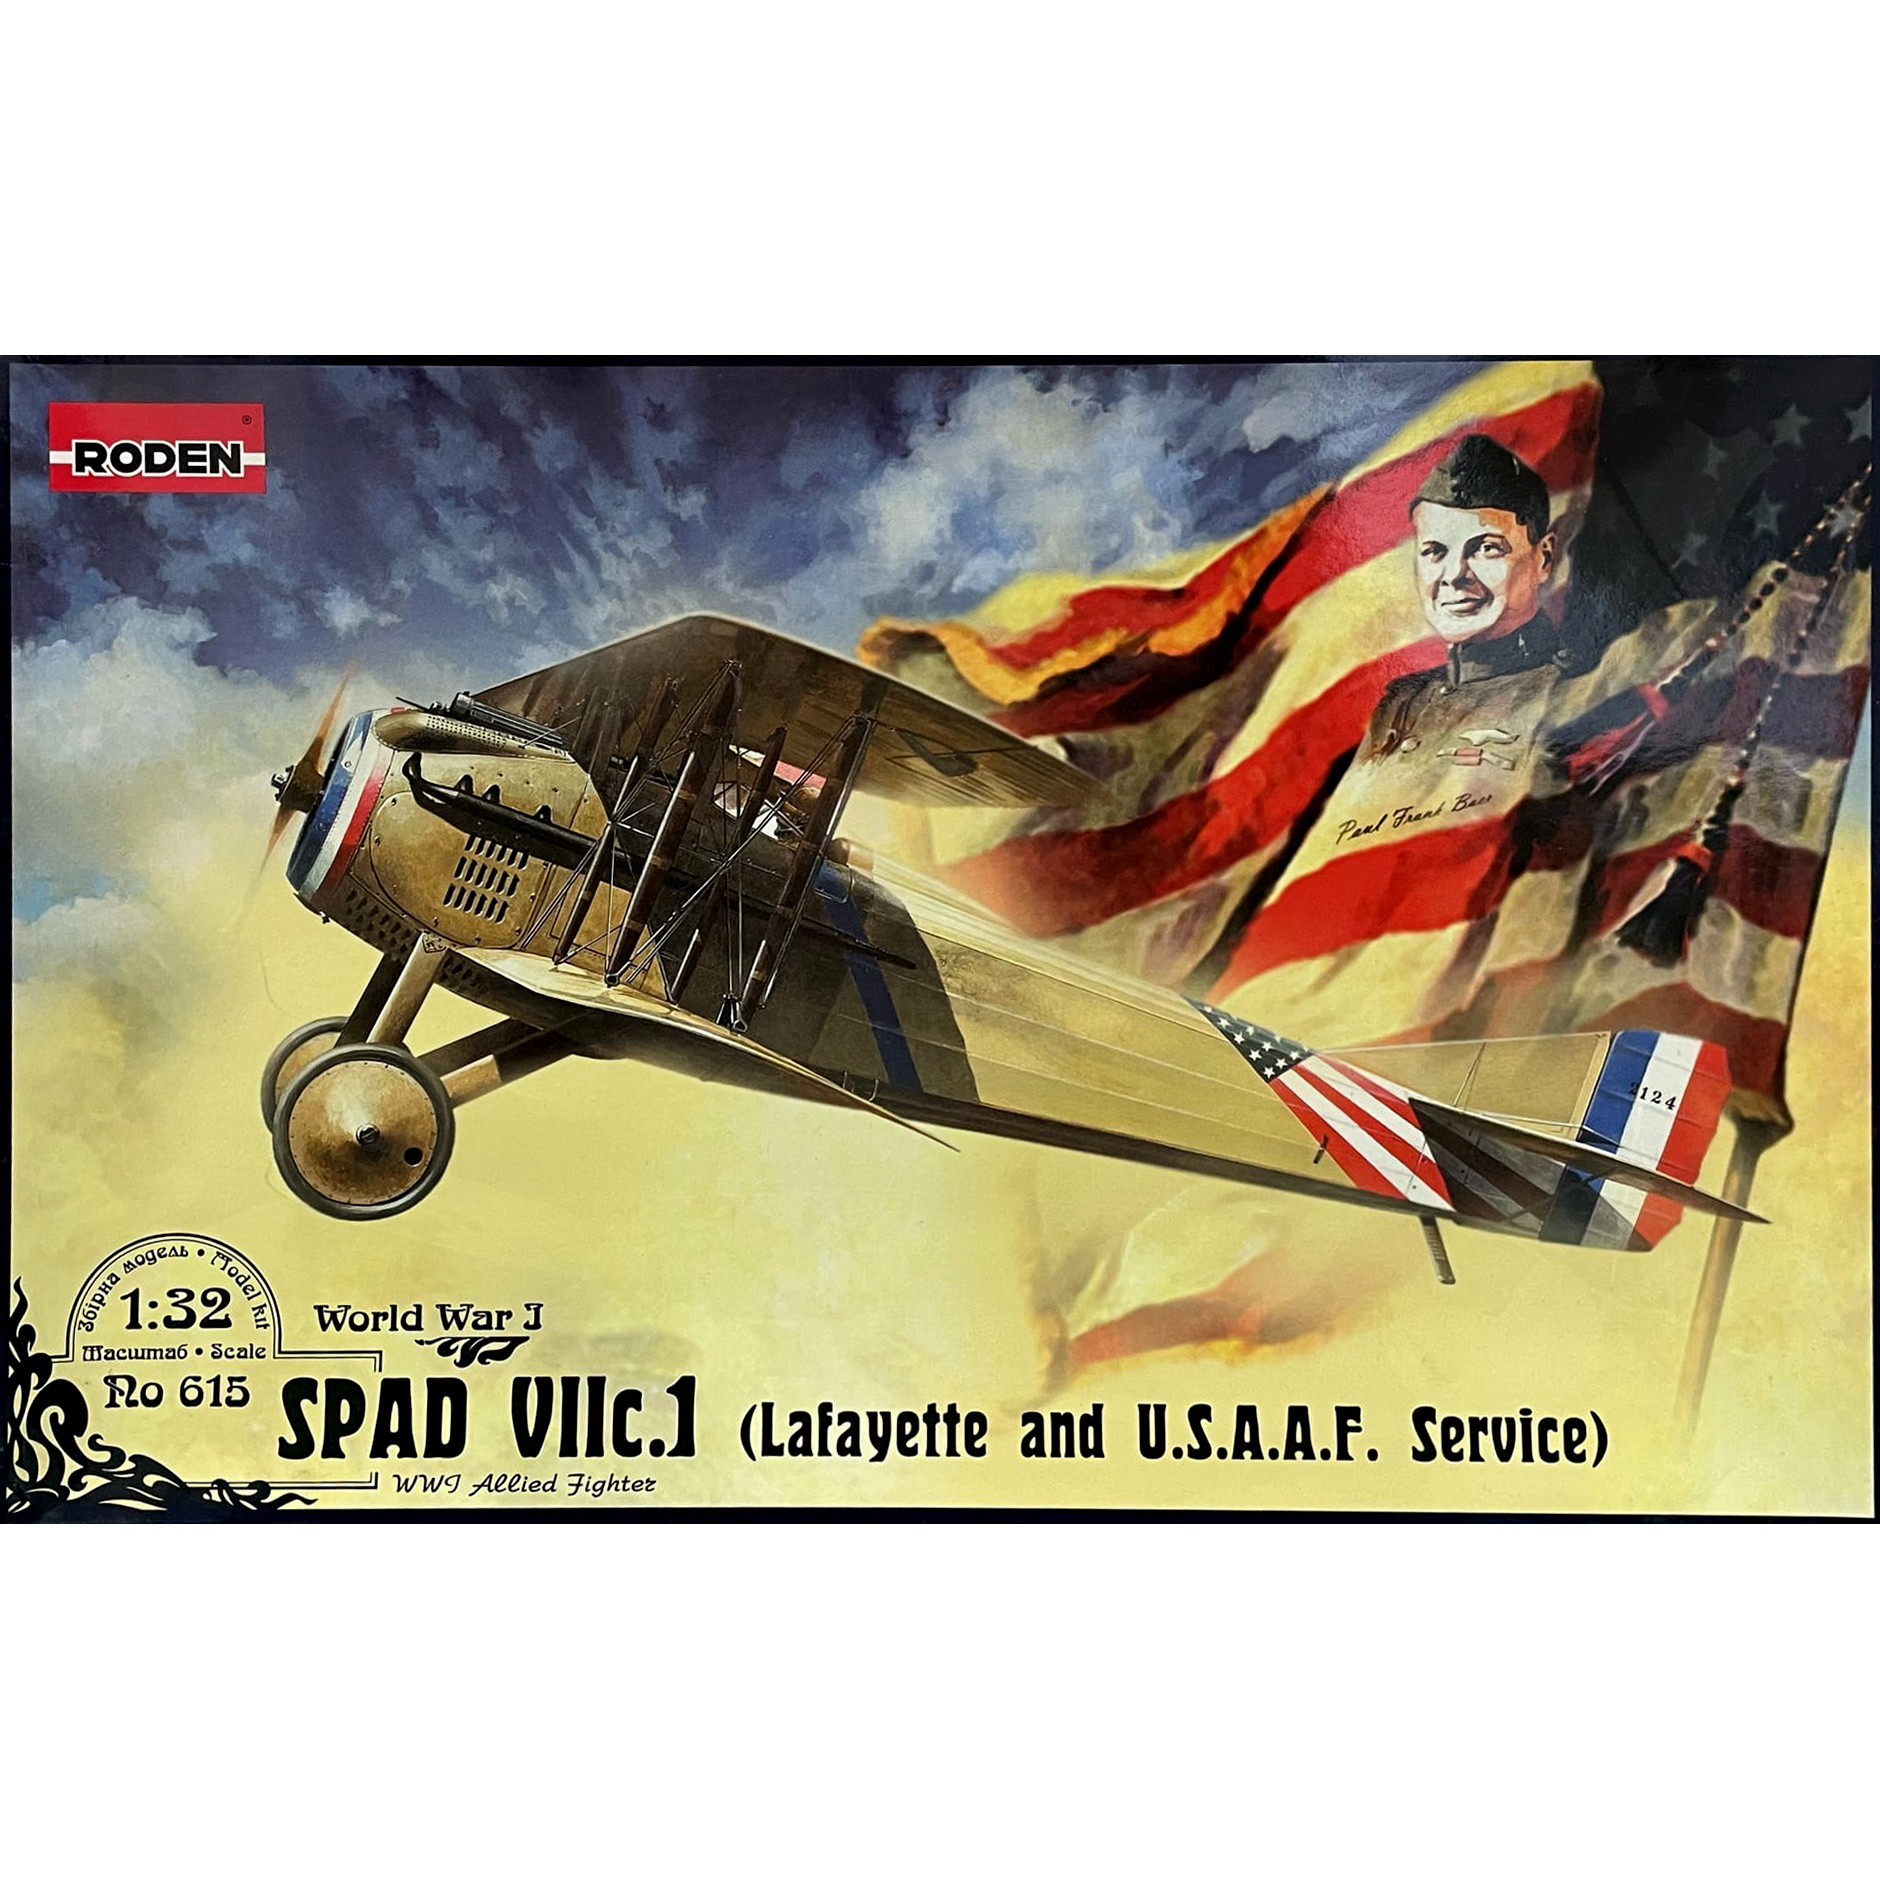 615 Roden 1/32 Spad Viic.1 (Lafayette and U.S.A.A.F. Service)